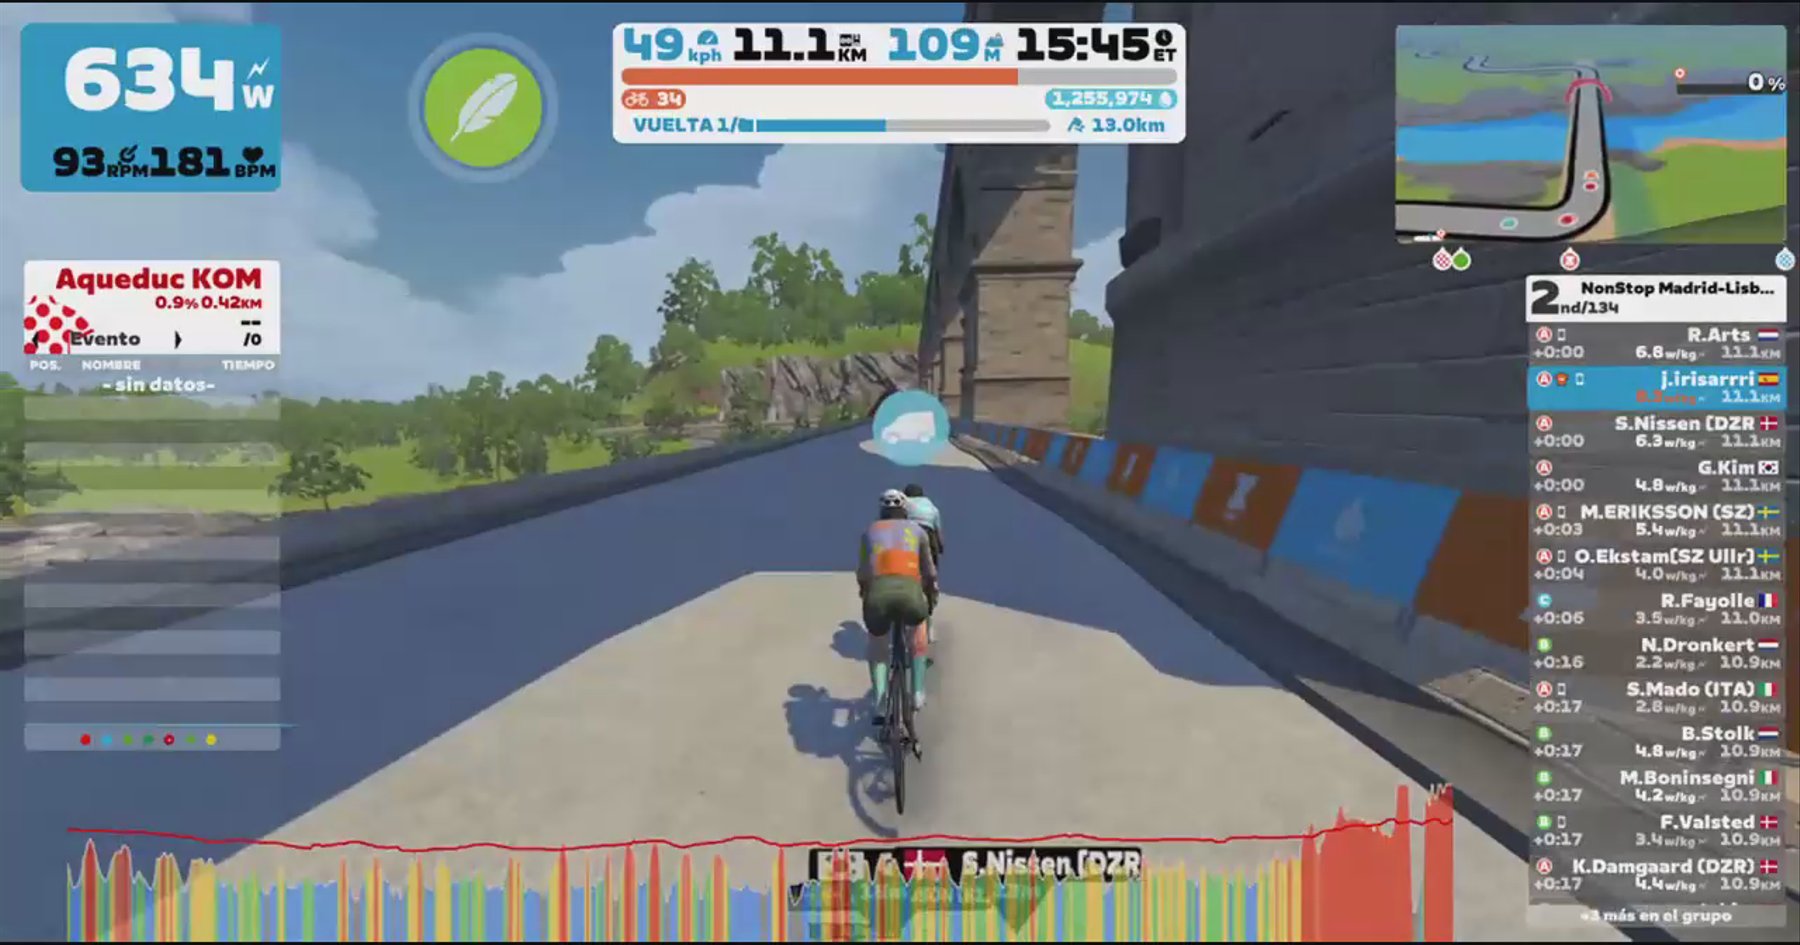 Zwift - Race: NonStop Madrid-Lisboa Race Day (A) on Douce France in France